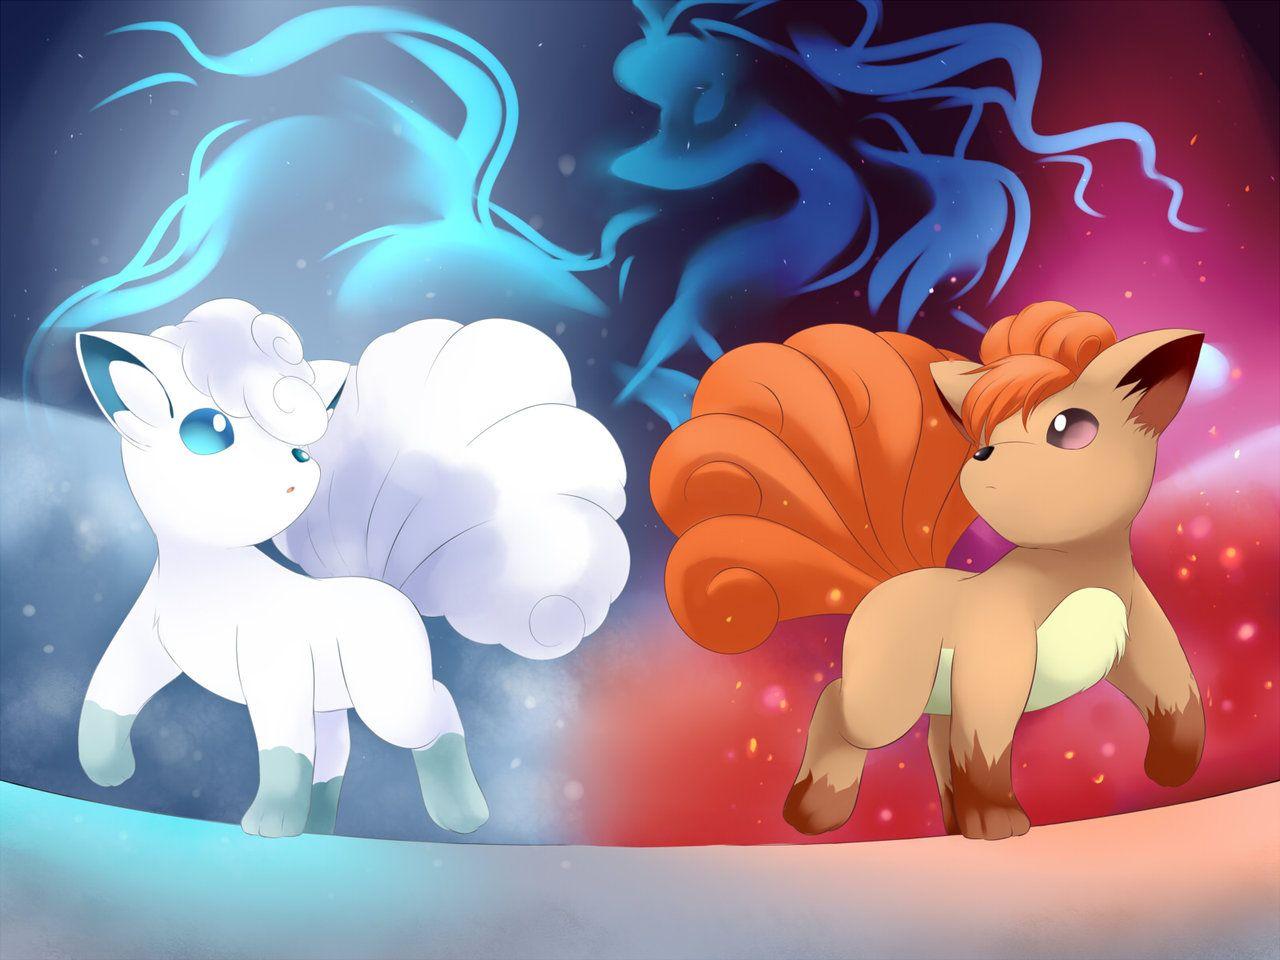 When Fire meets Ice: The path of Vulpix by YomiTrooper.